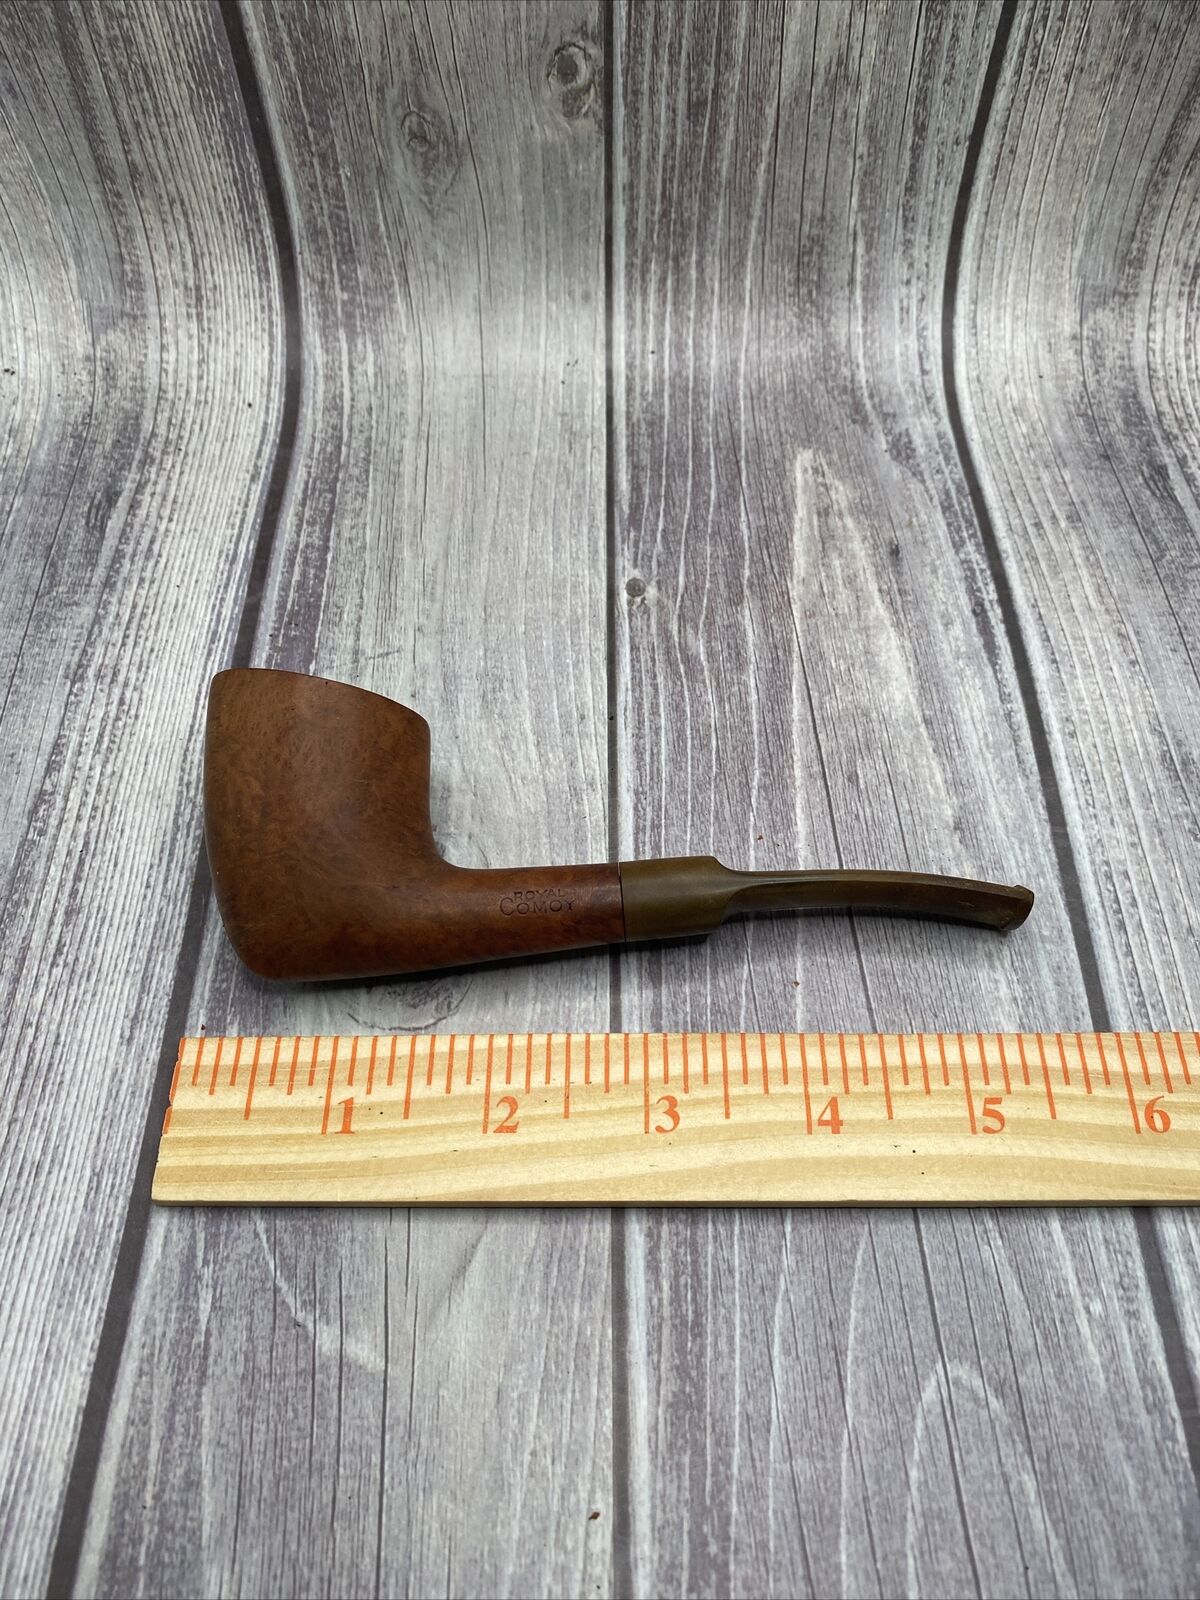 Vintage ROYAL COMOY'S #589 - Beautiful Pipe